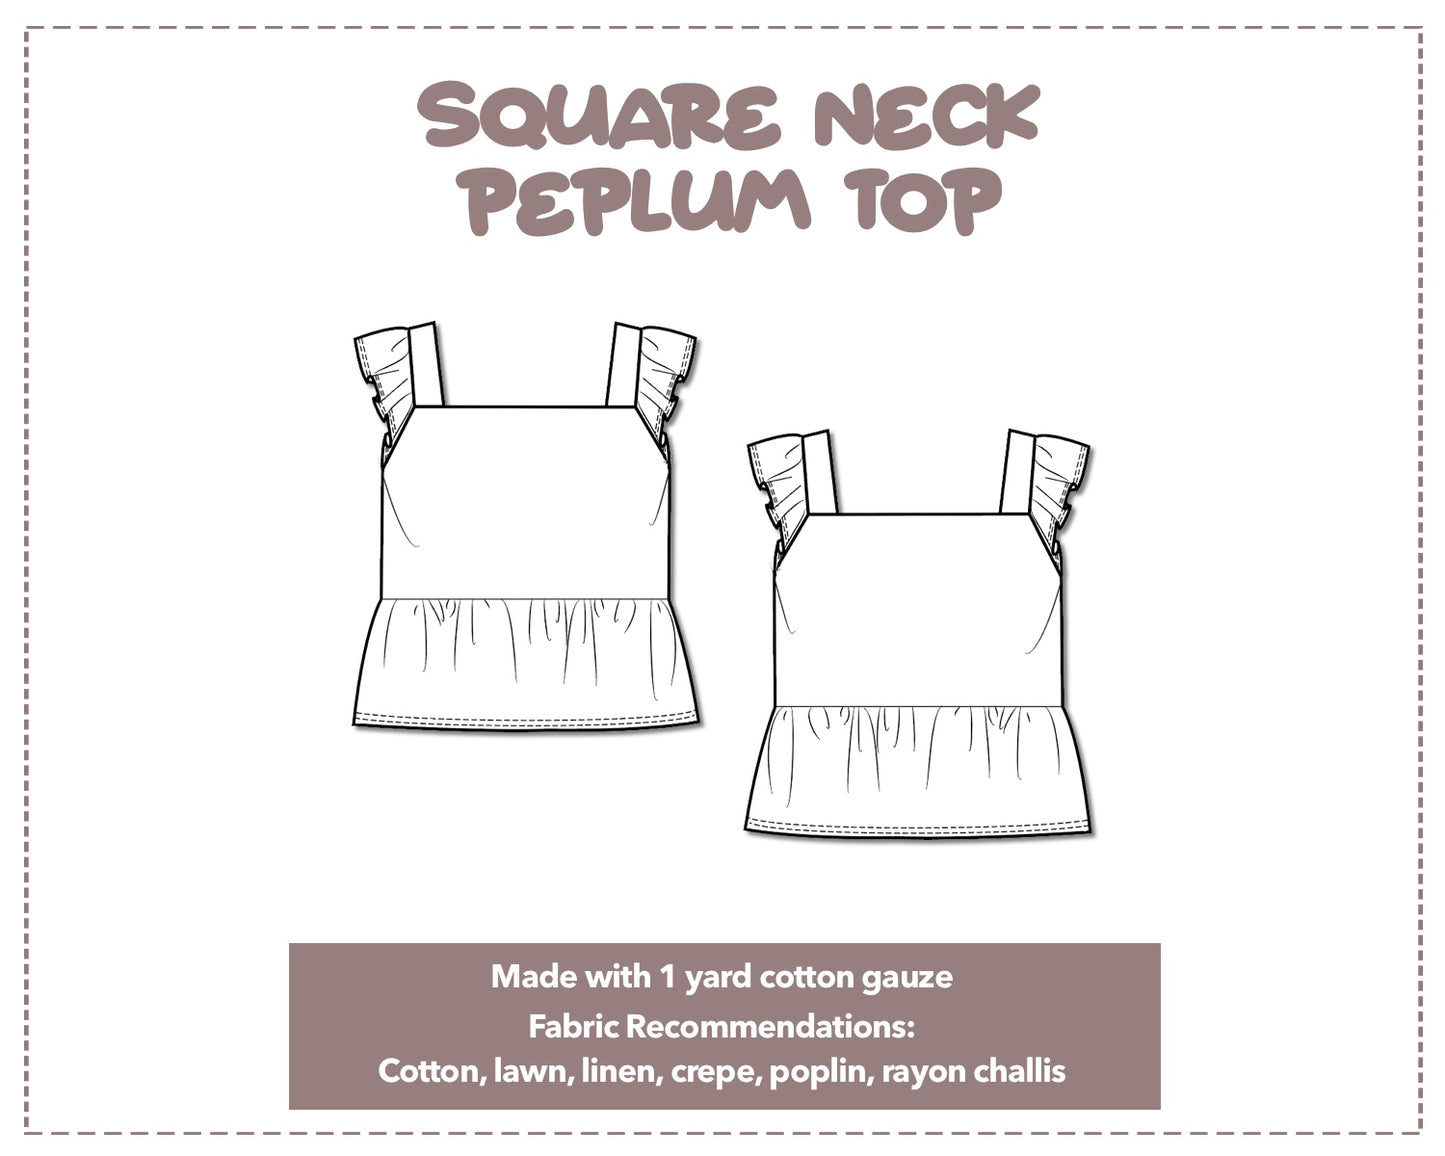 Illustration and detailed description for Square Neck Short Sleeve Peplum Top sewing pattern.